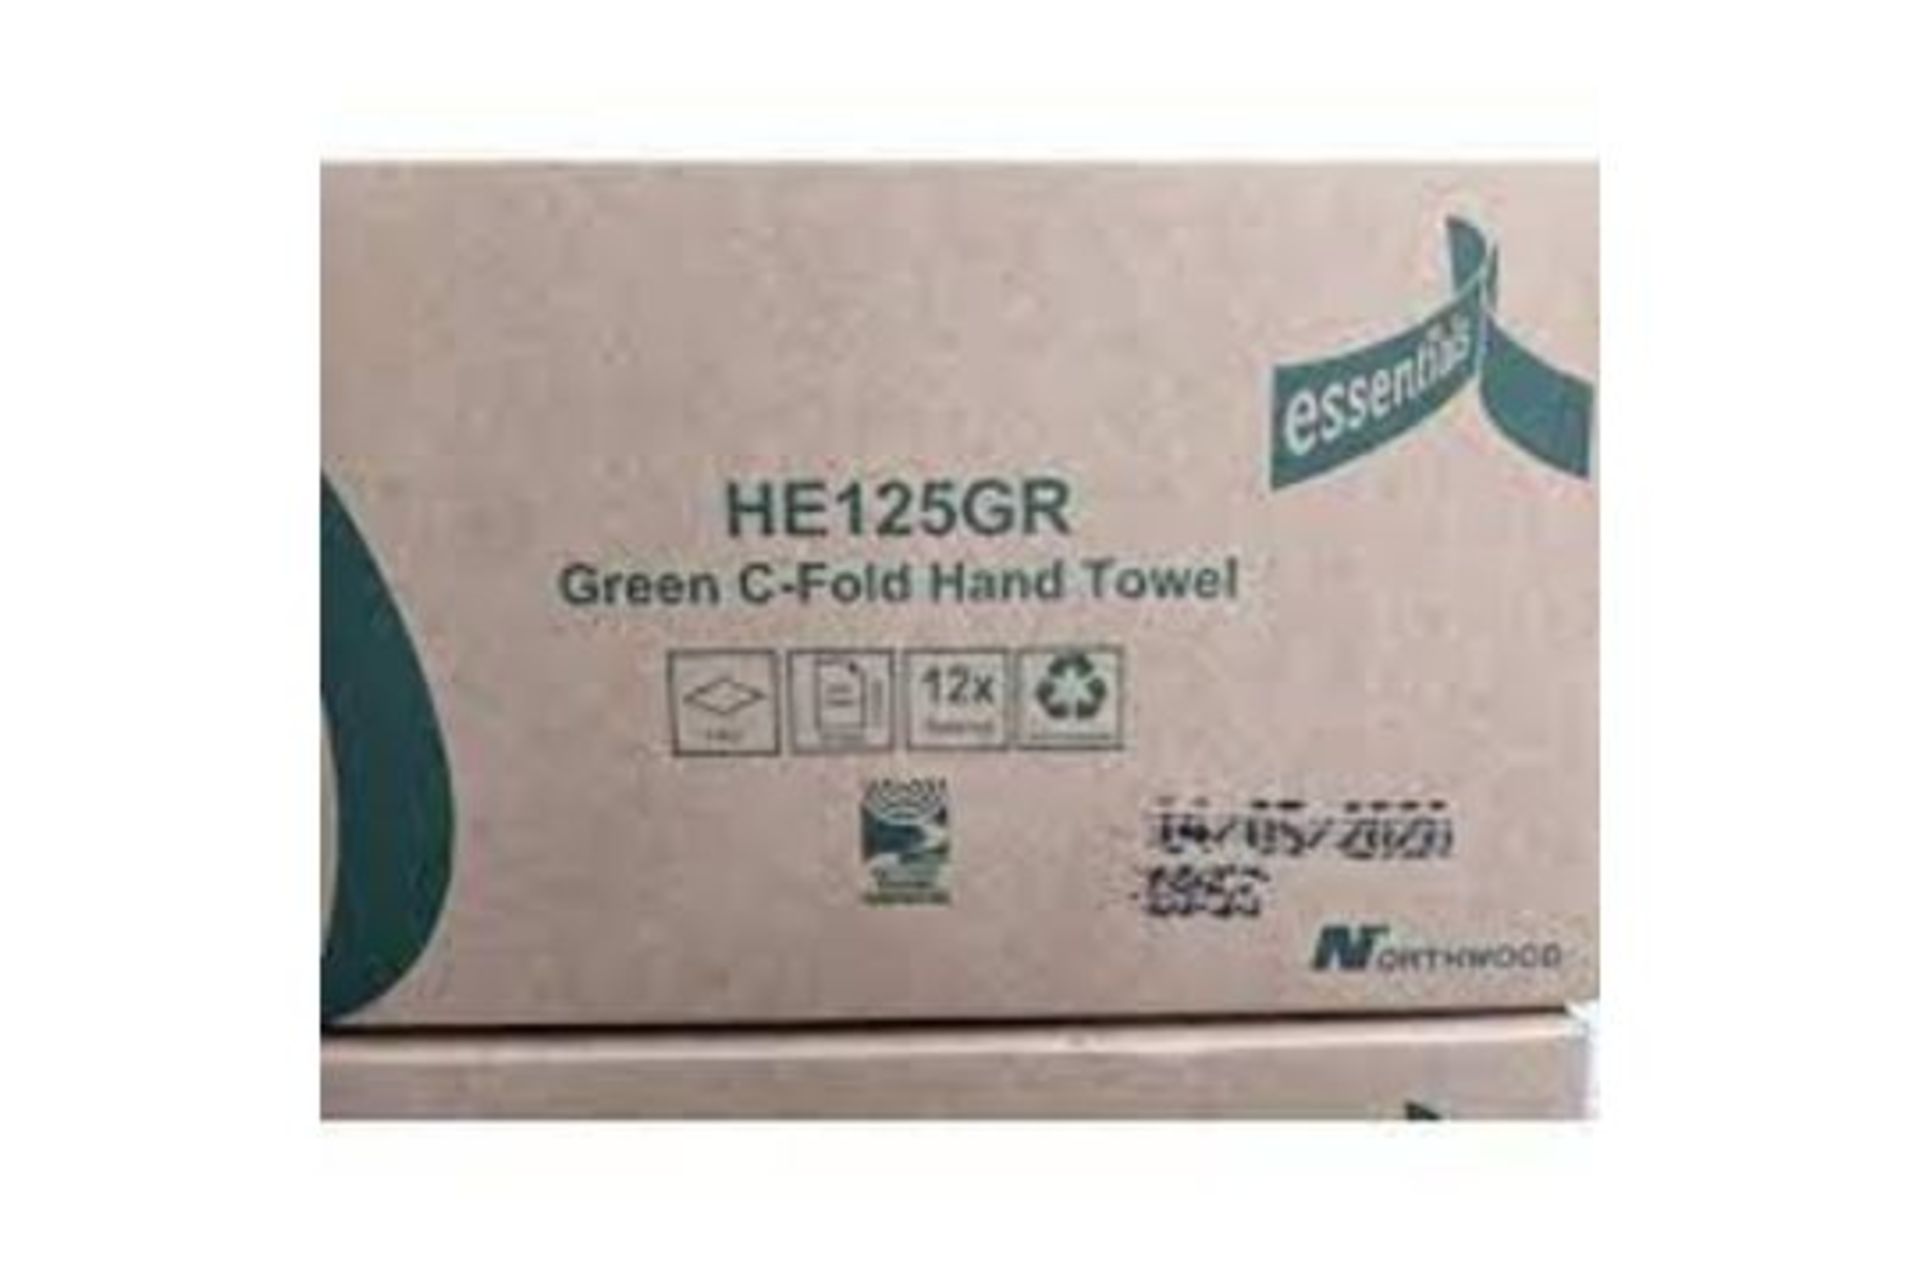 10 X NEW BOXES OF ESSENTIALS HE125GR GREEN C-FOLD HAND TOWELS. EACH BOX CONTAINS 12 SLEEVES. EACH